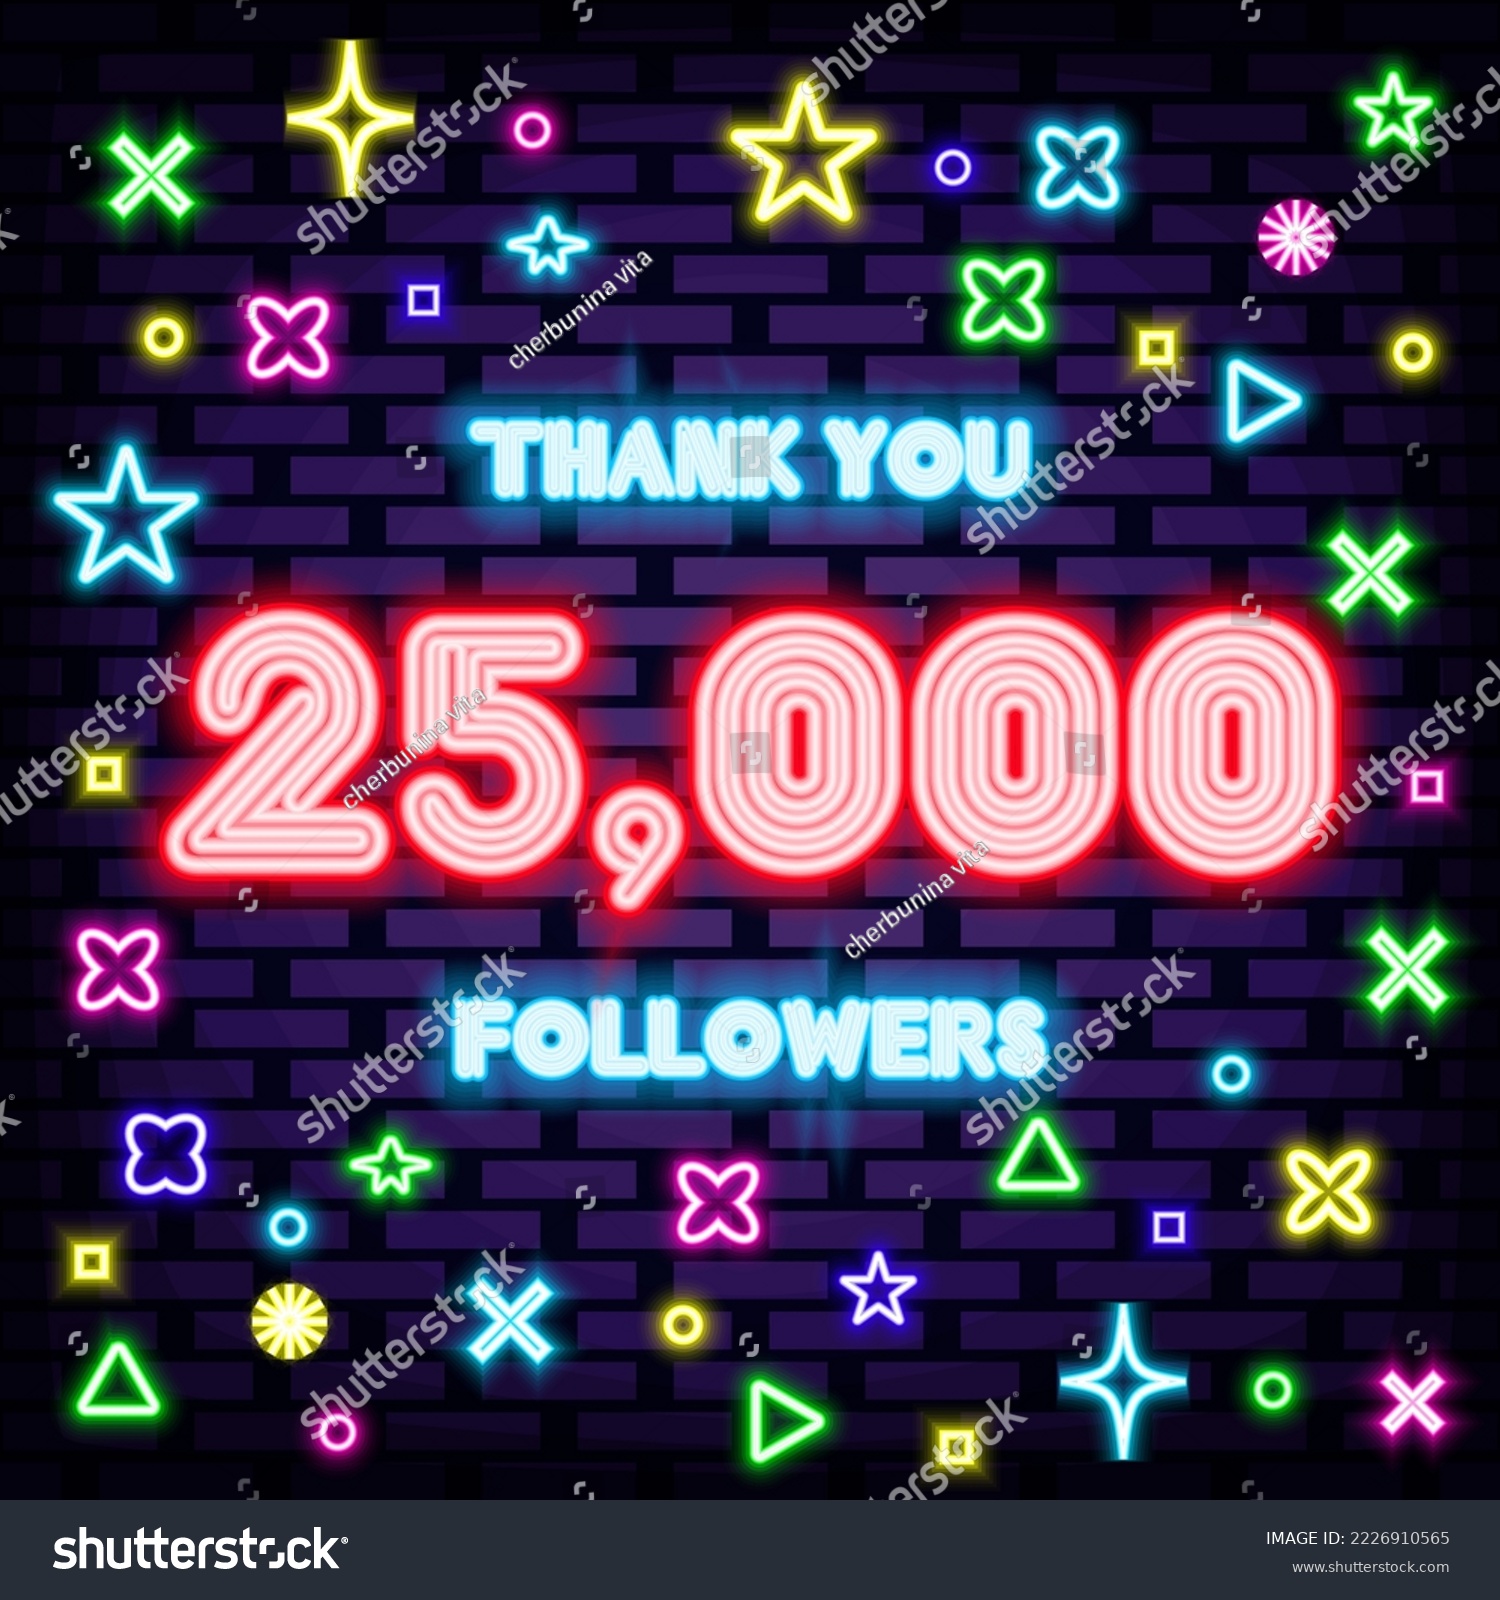 SVG of 25000 Followers Thank you Badge in neon style. Glowing with colorful neon light. Neon text. Design element. Vector Illustration svg